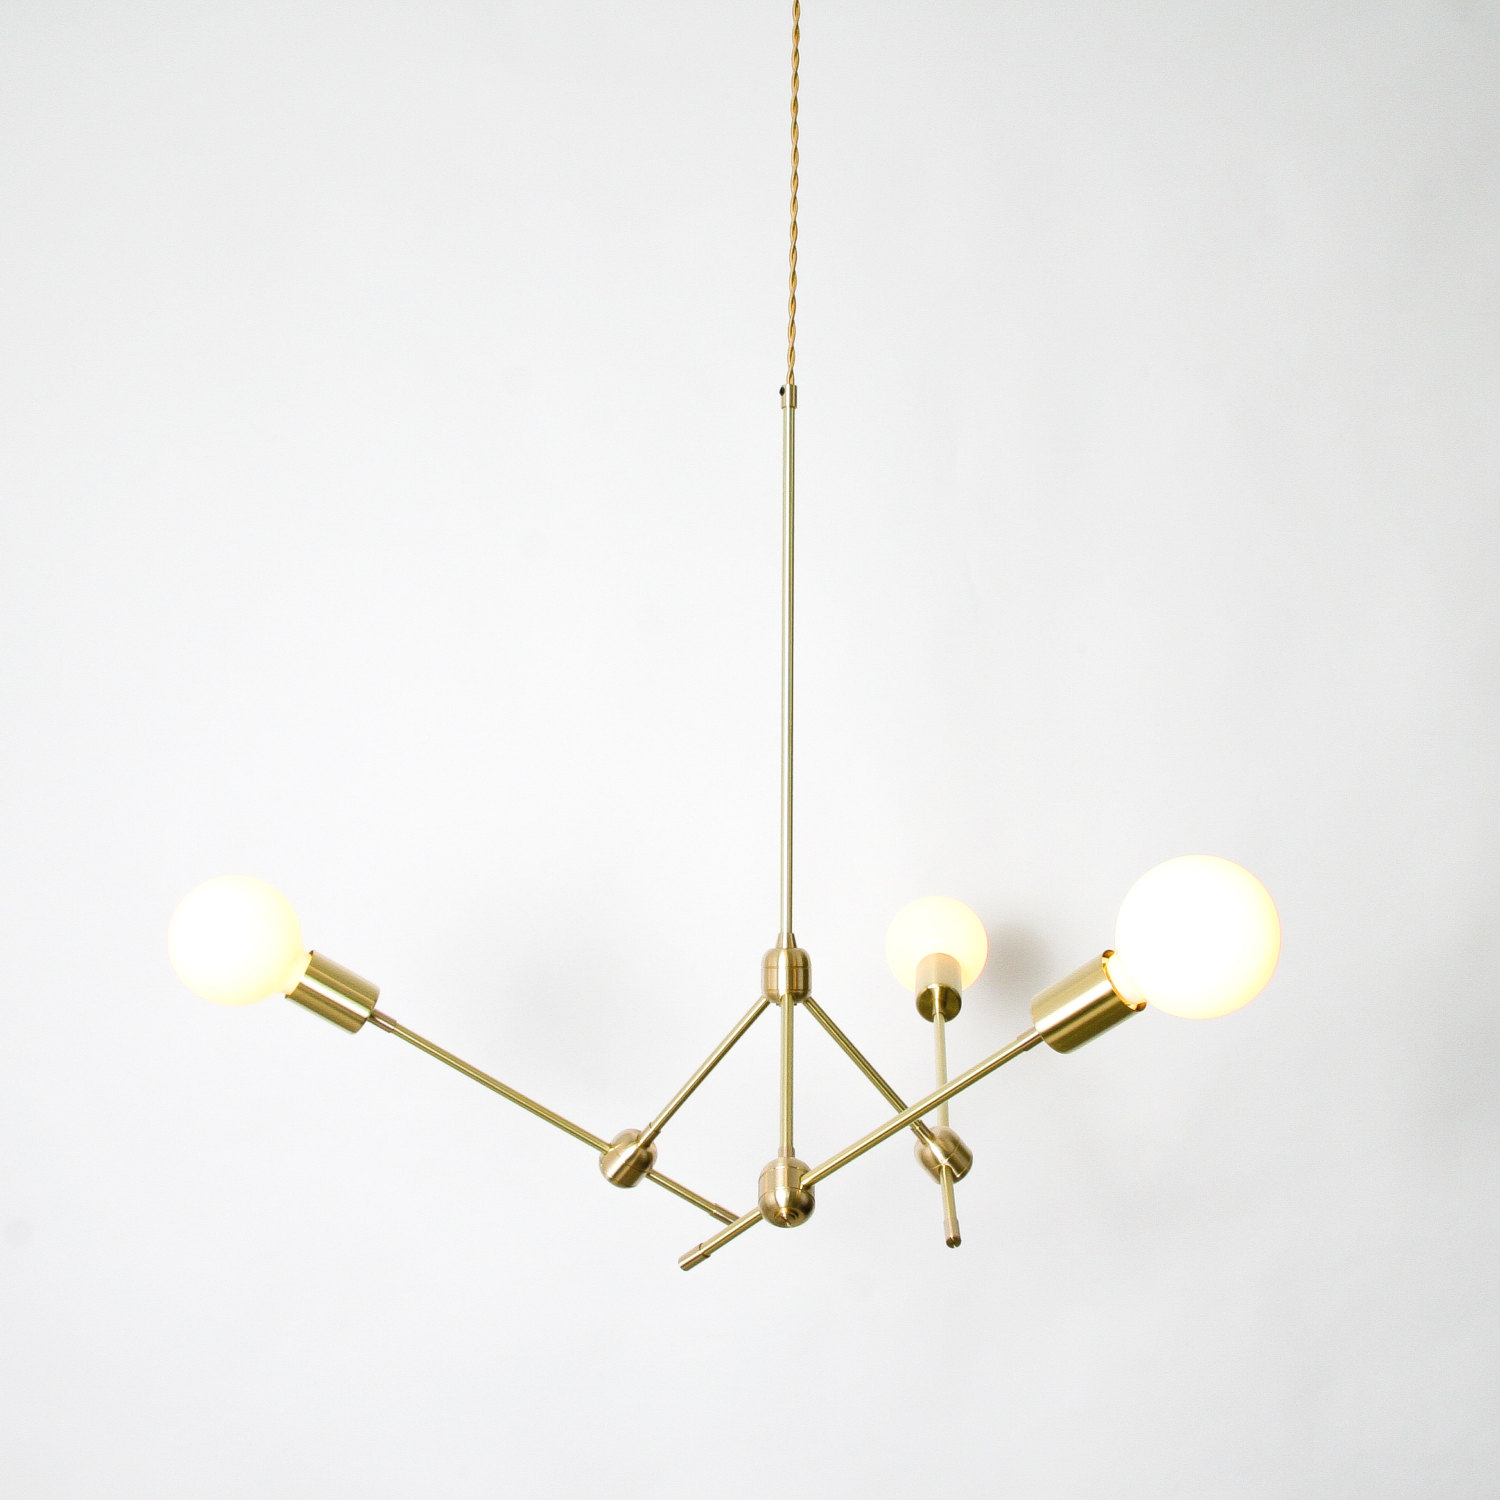 minimal lamps from Etsy